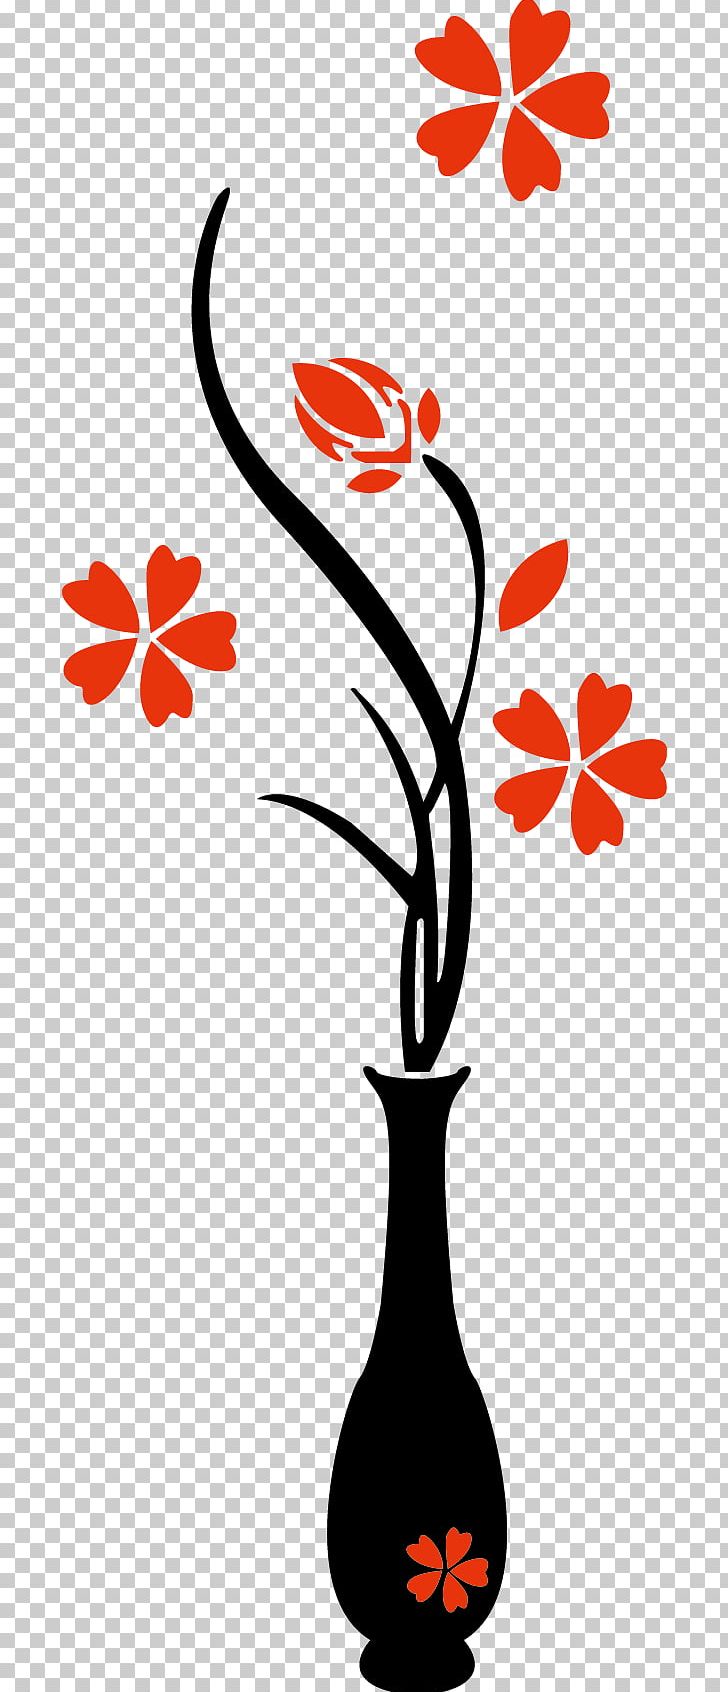 Vase Wall Decal Decorative Arts Sticker PNG, Clipart, Art, Black And White, Decal, Decor, Decorative Free PNG Download